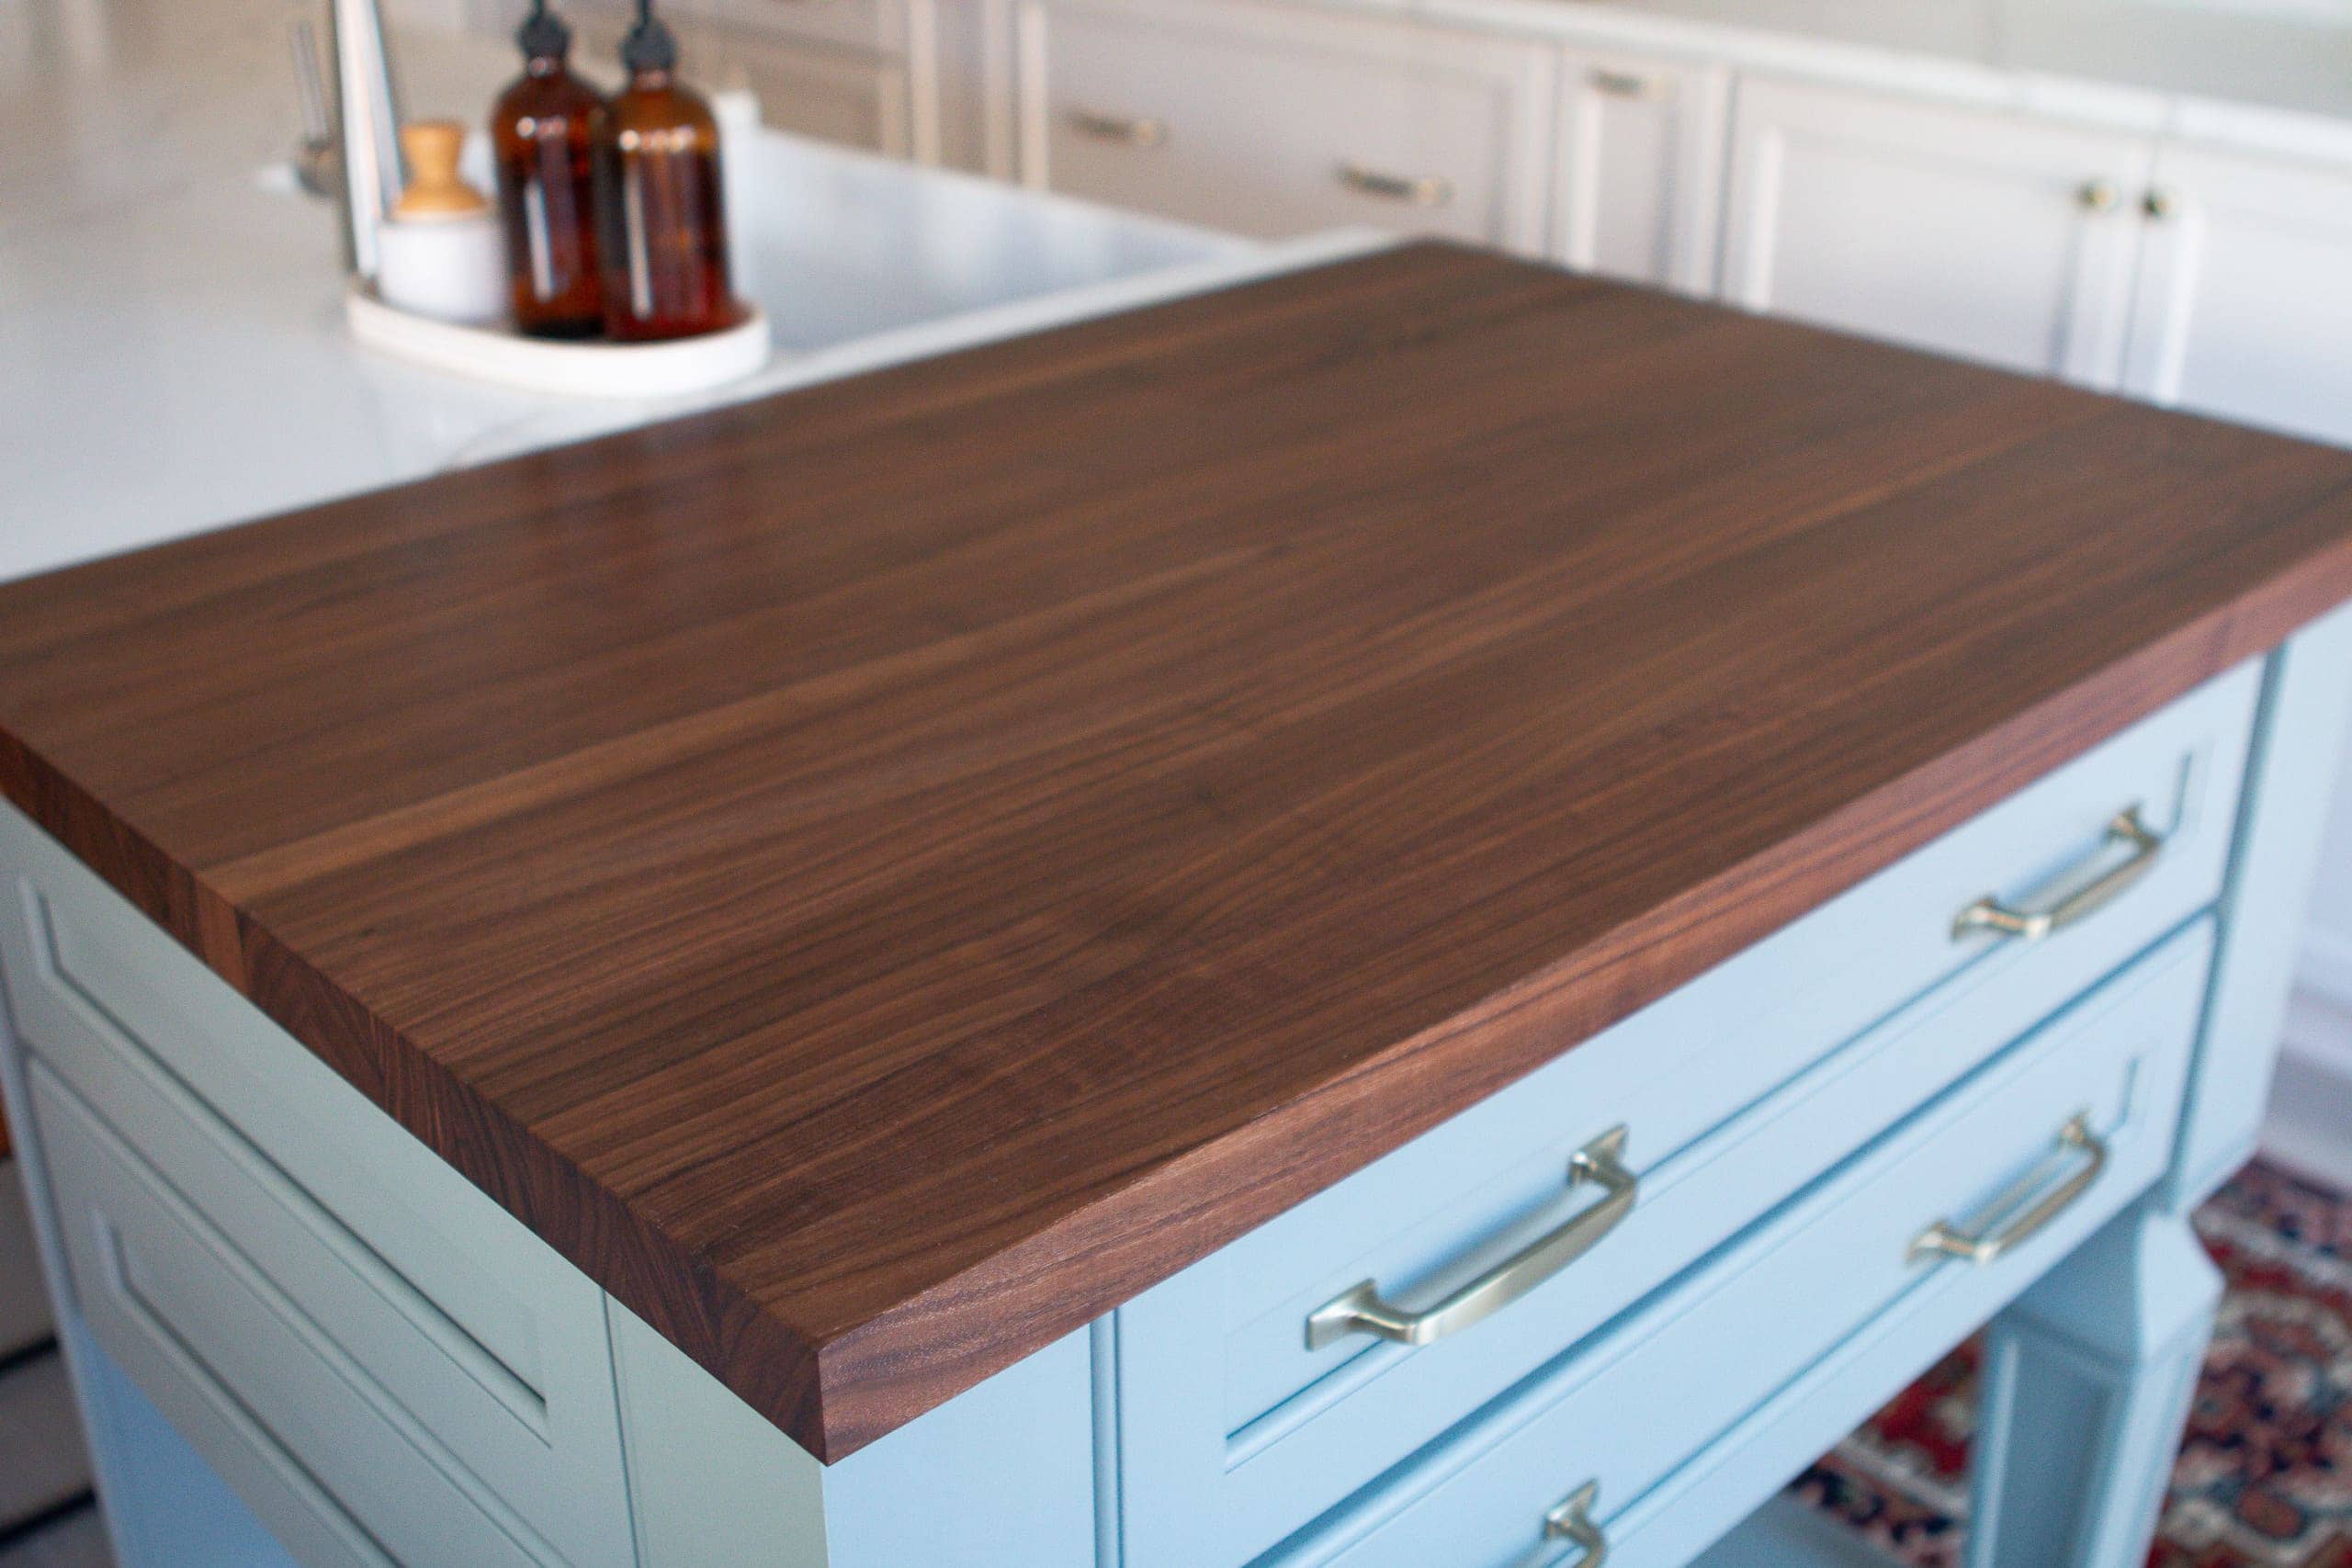 Adding a butcher block to our kitchen island